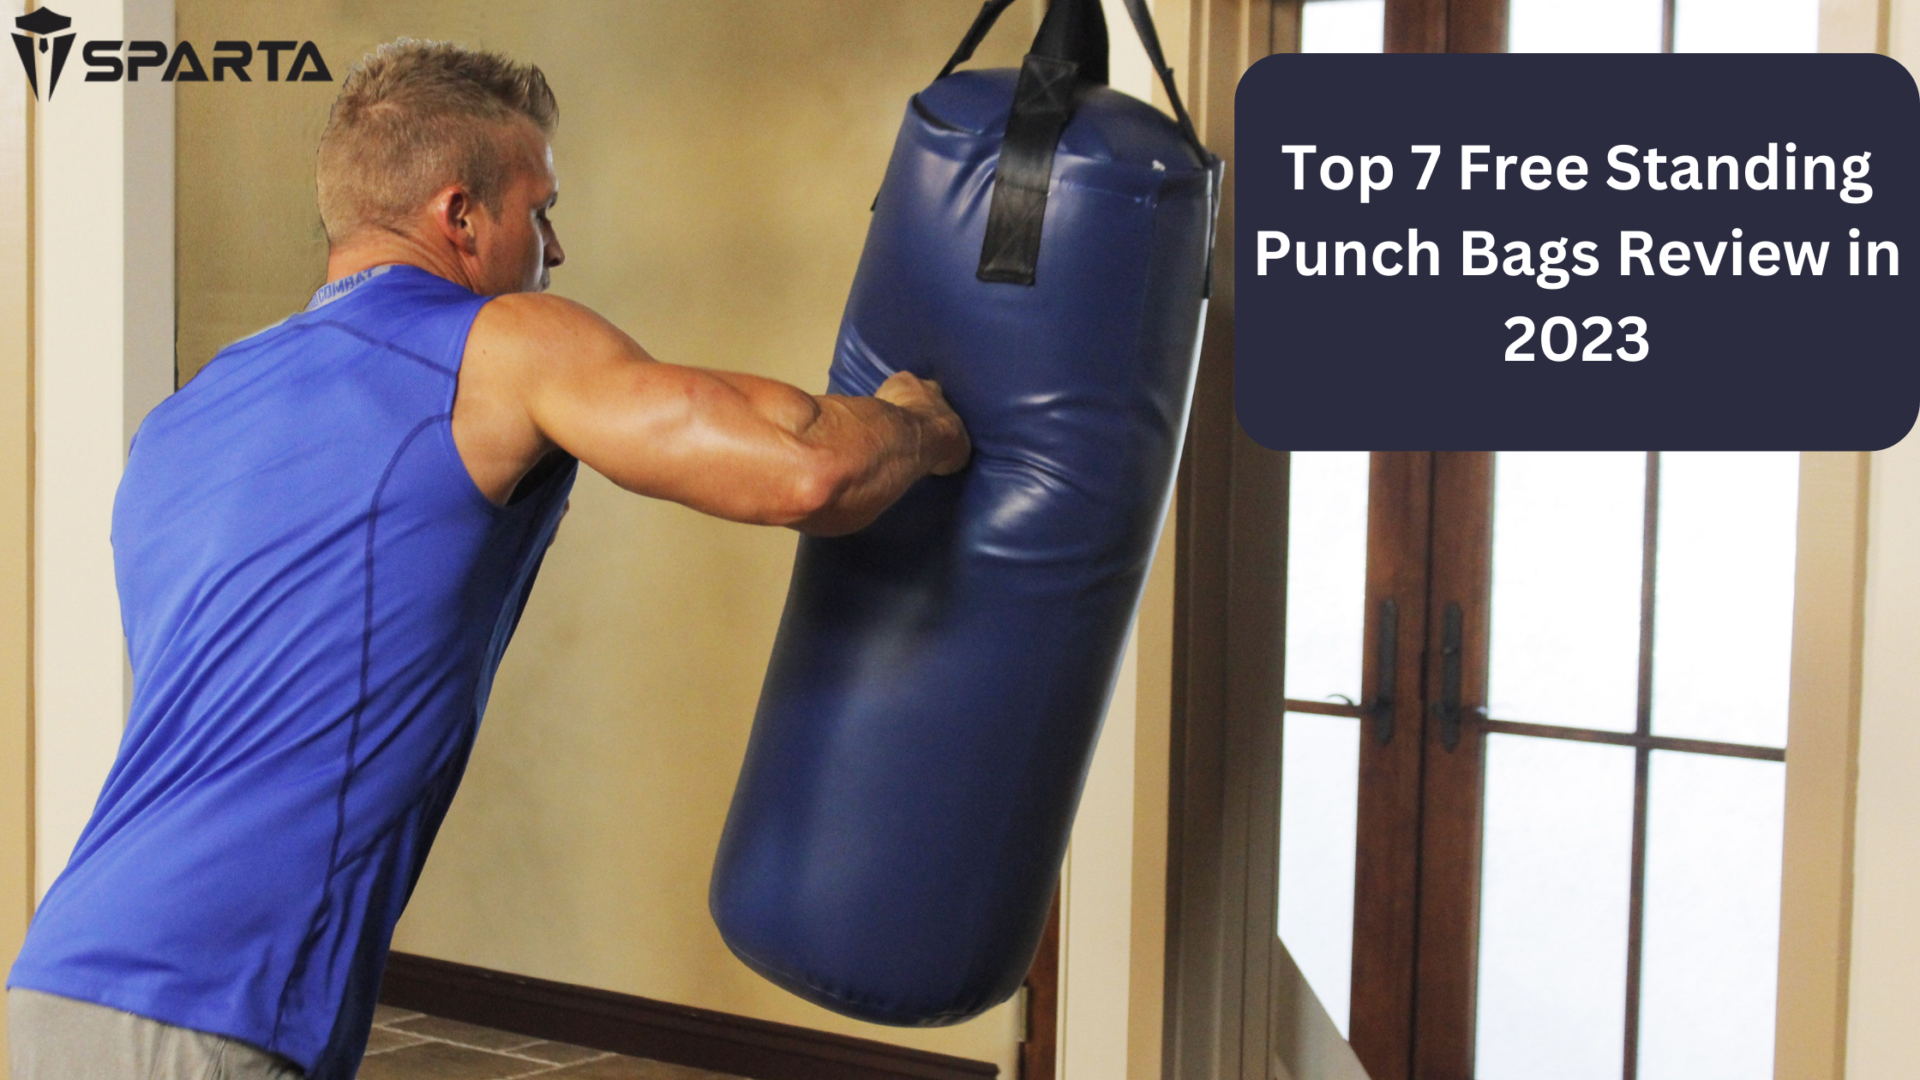 Top 7 Free Standing Punch Bags Review in 2023